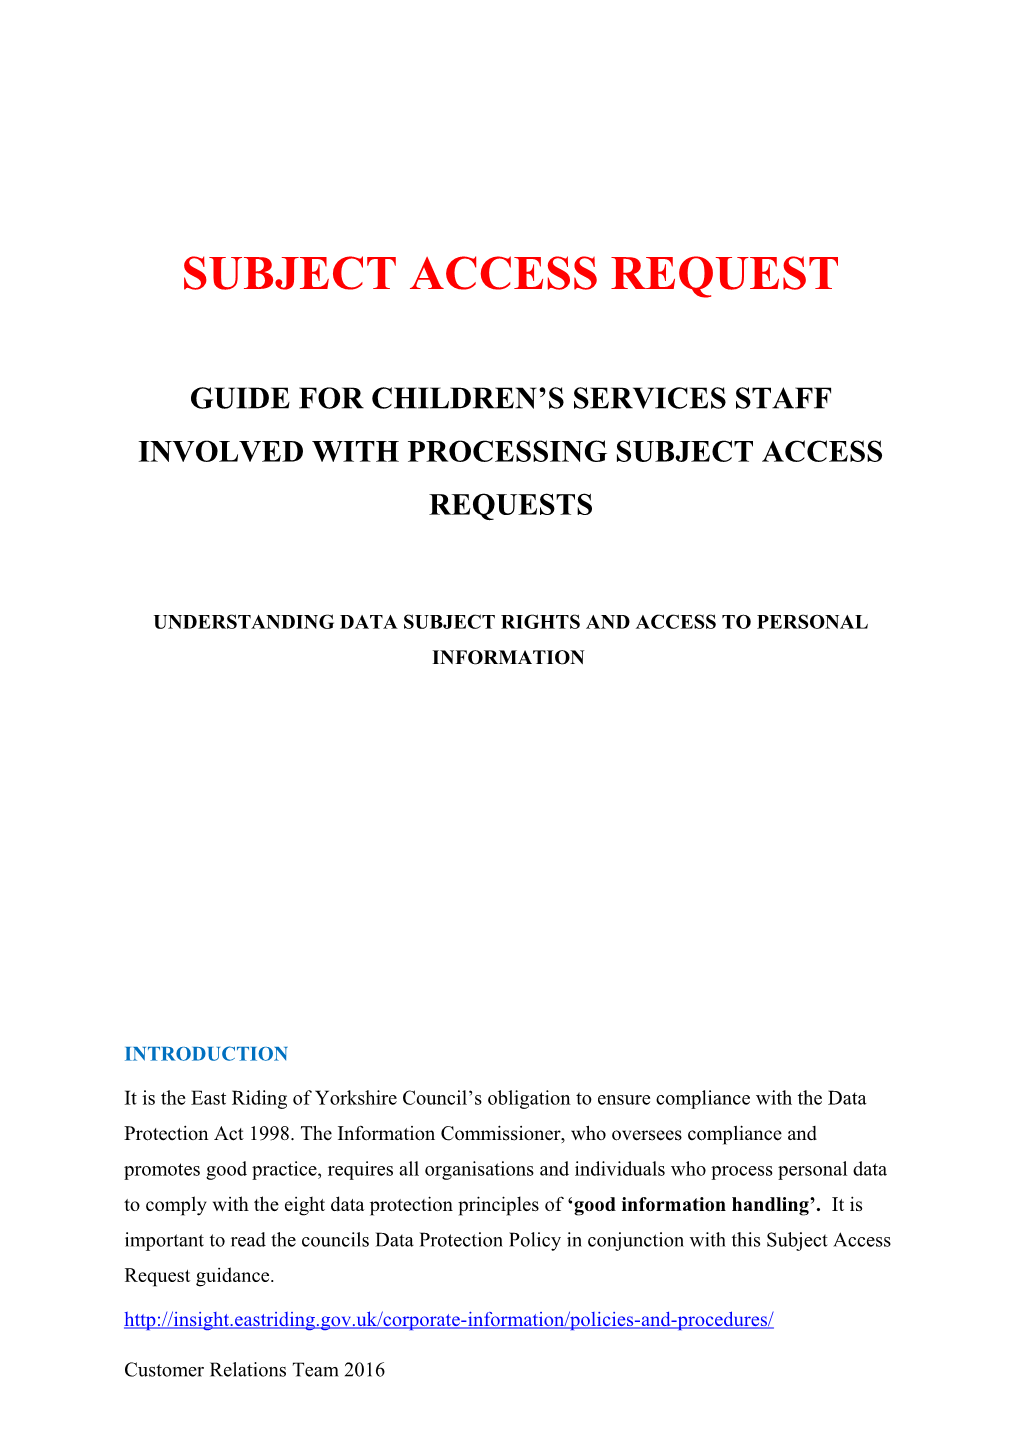 Guide for All Staff Involved in Processing Subject Access Requests